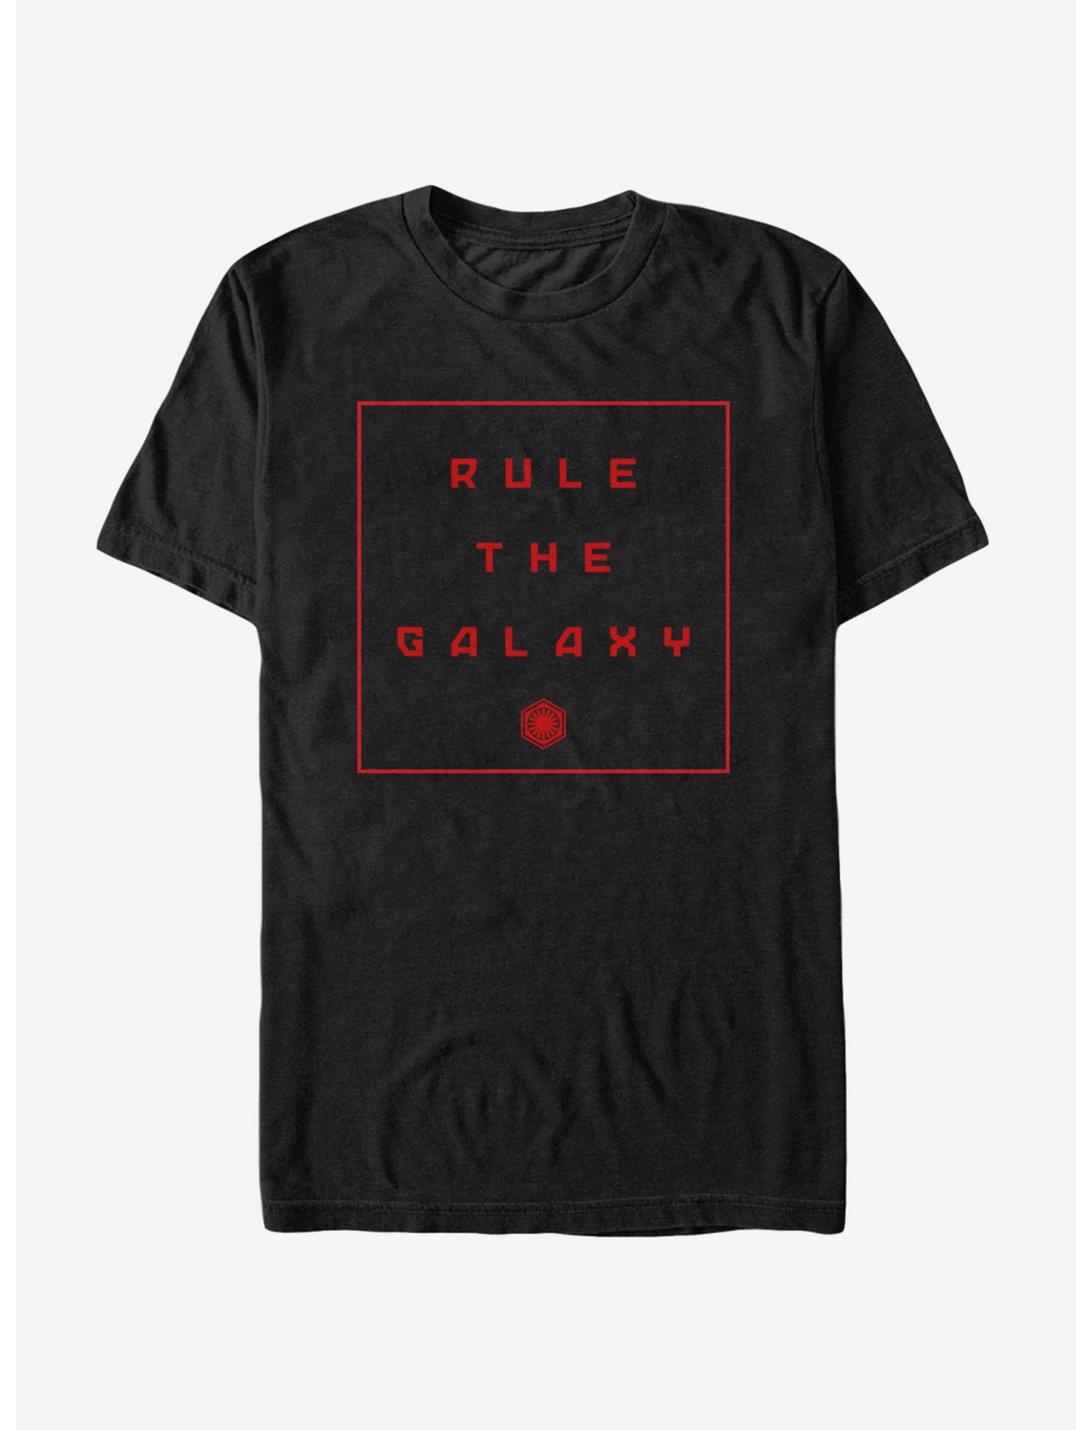 Star Wars The Force Awakens Rule the Galaxy T-Shirt, BLACK, hi-res